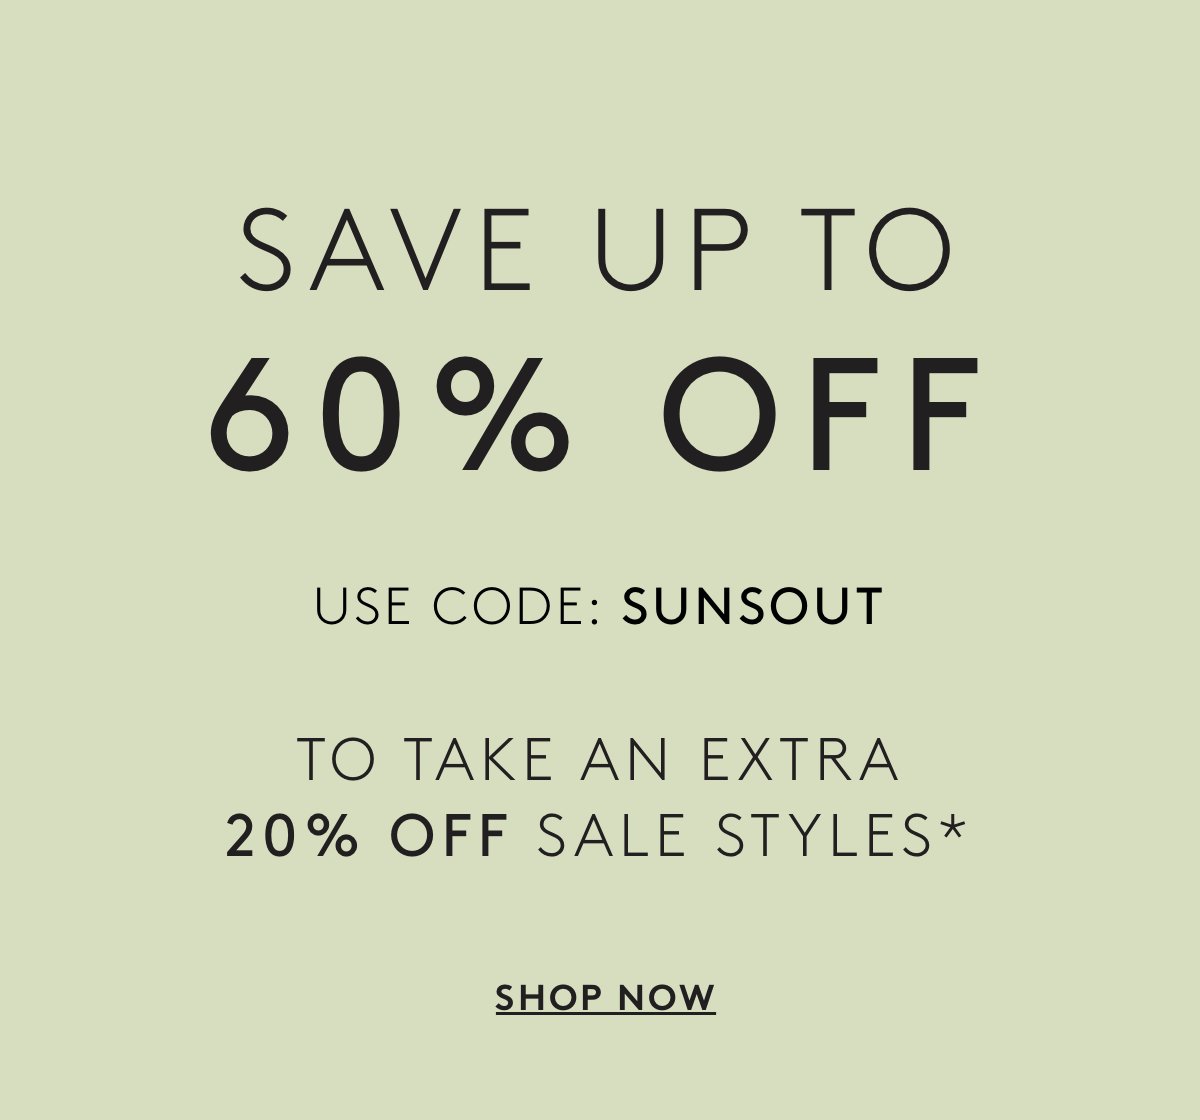 Save Up To 60% Off // Use Code: SUNSOUT | To Take An Extra 20% Off Sale Styles* | Shop Now